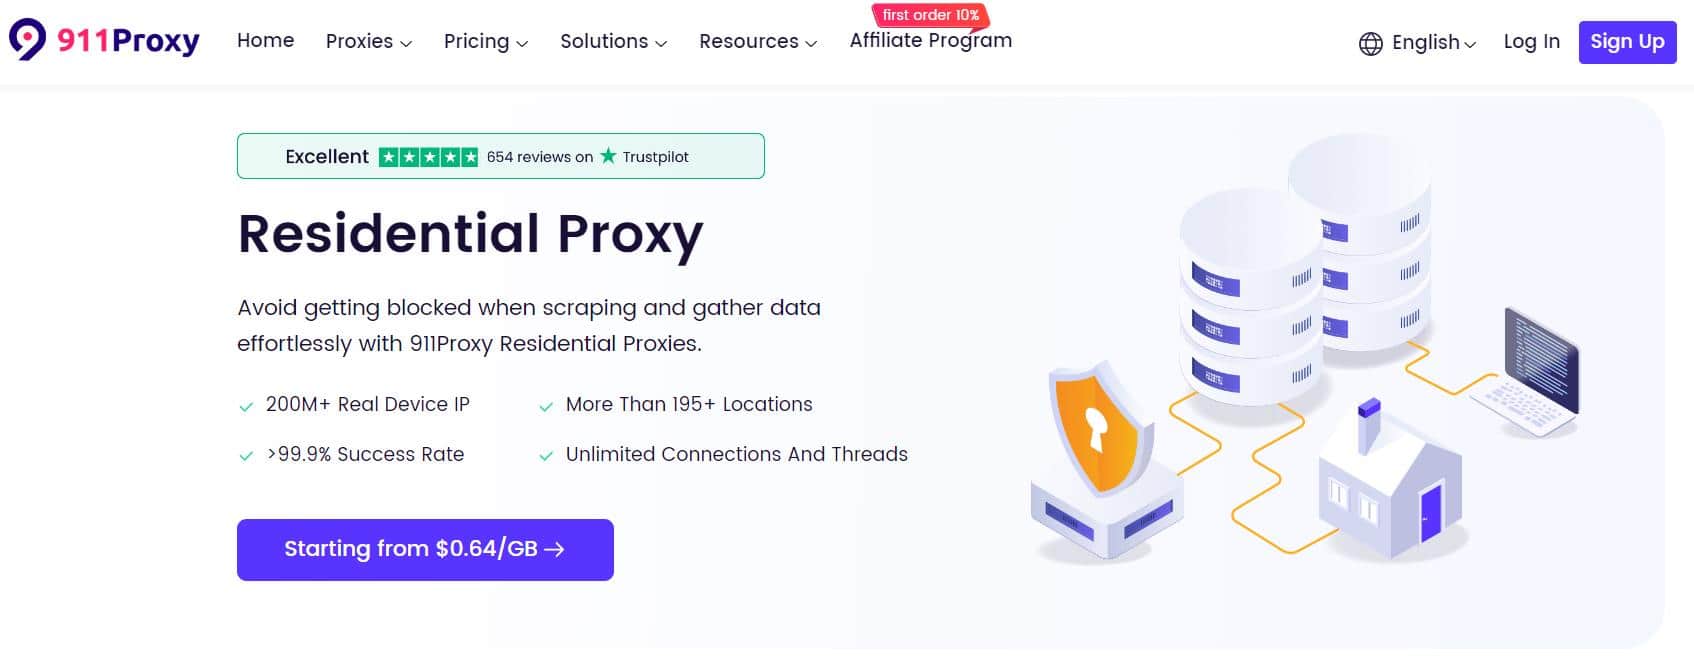 911Proxy Residential Proxy Homepage